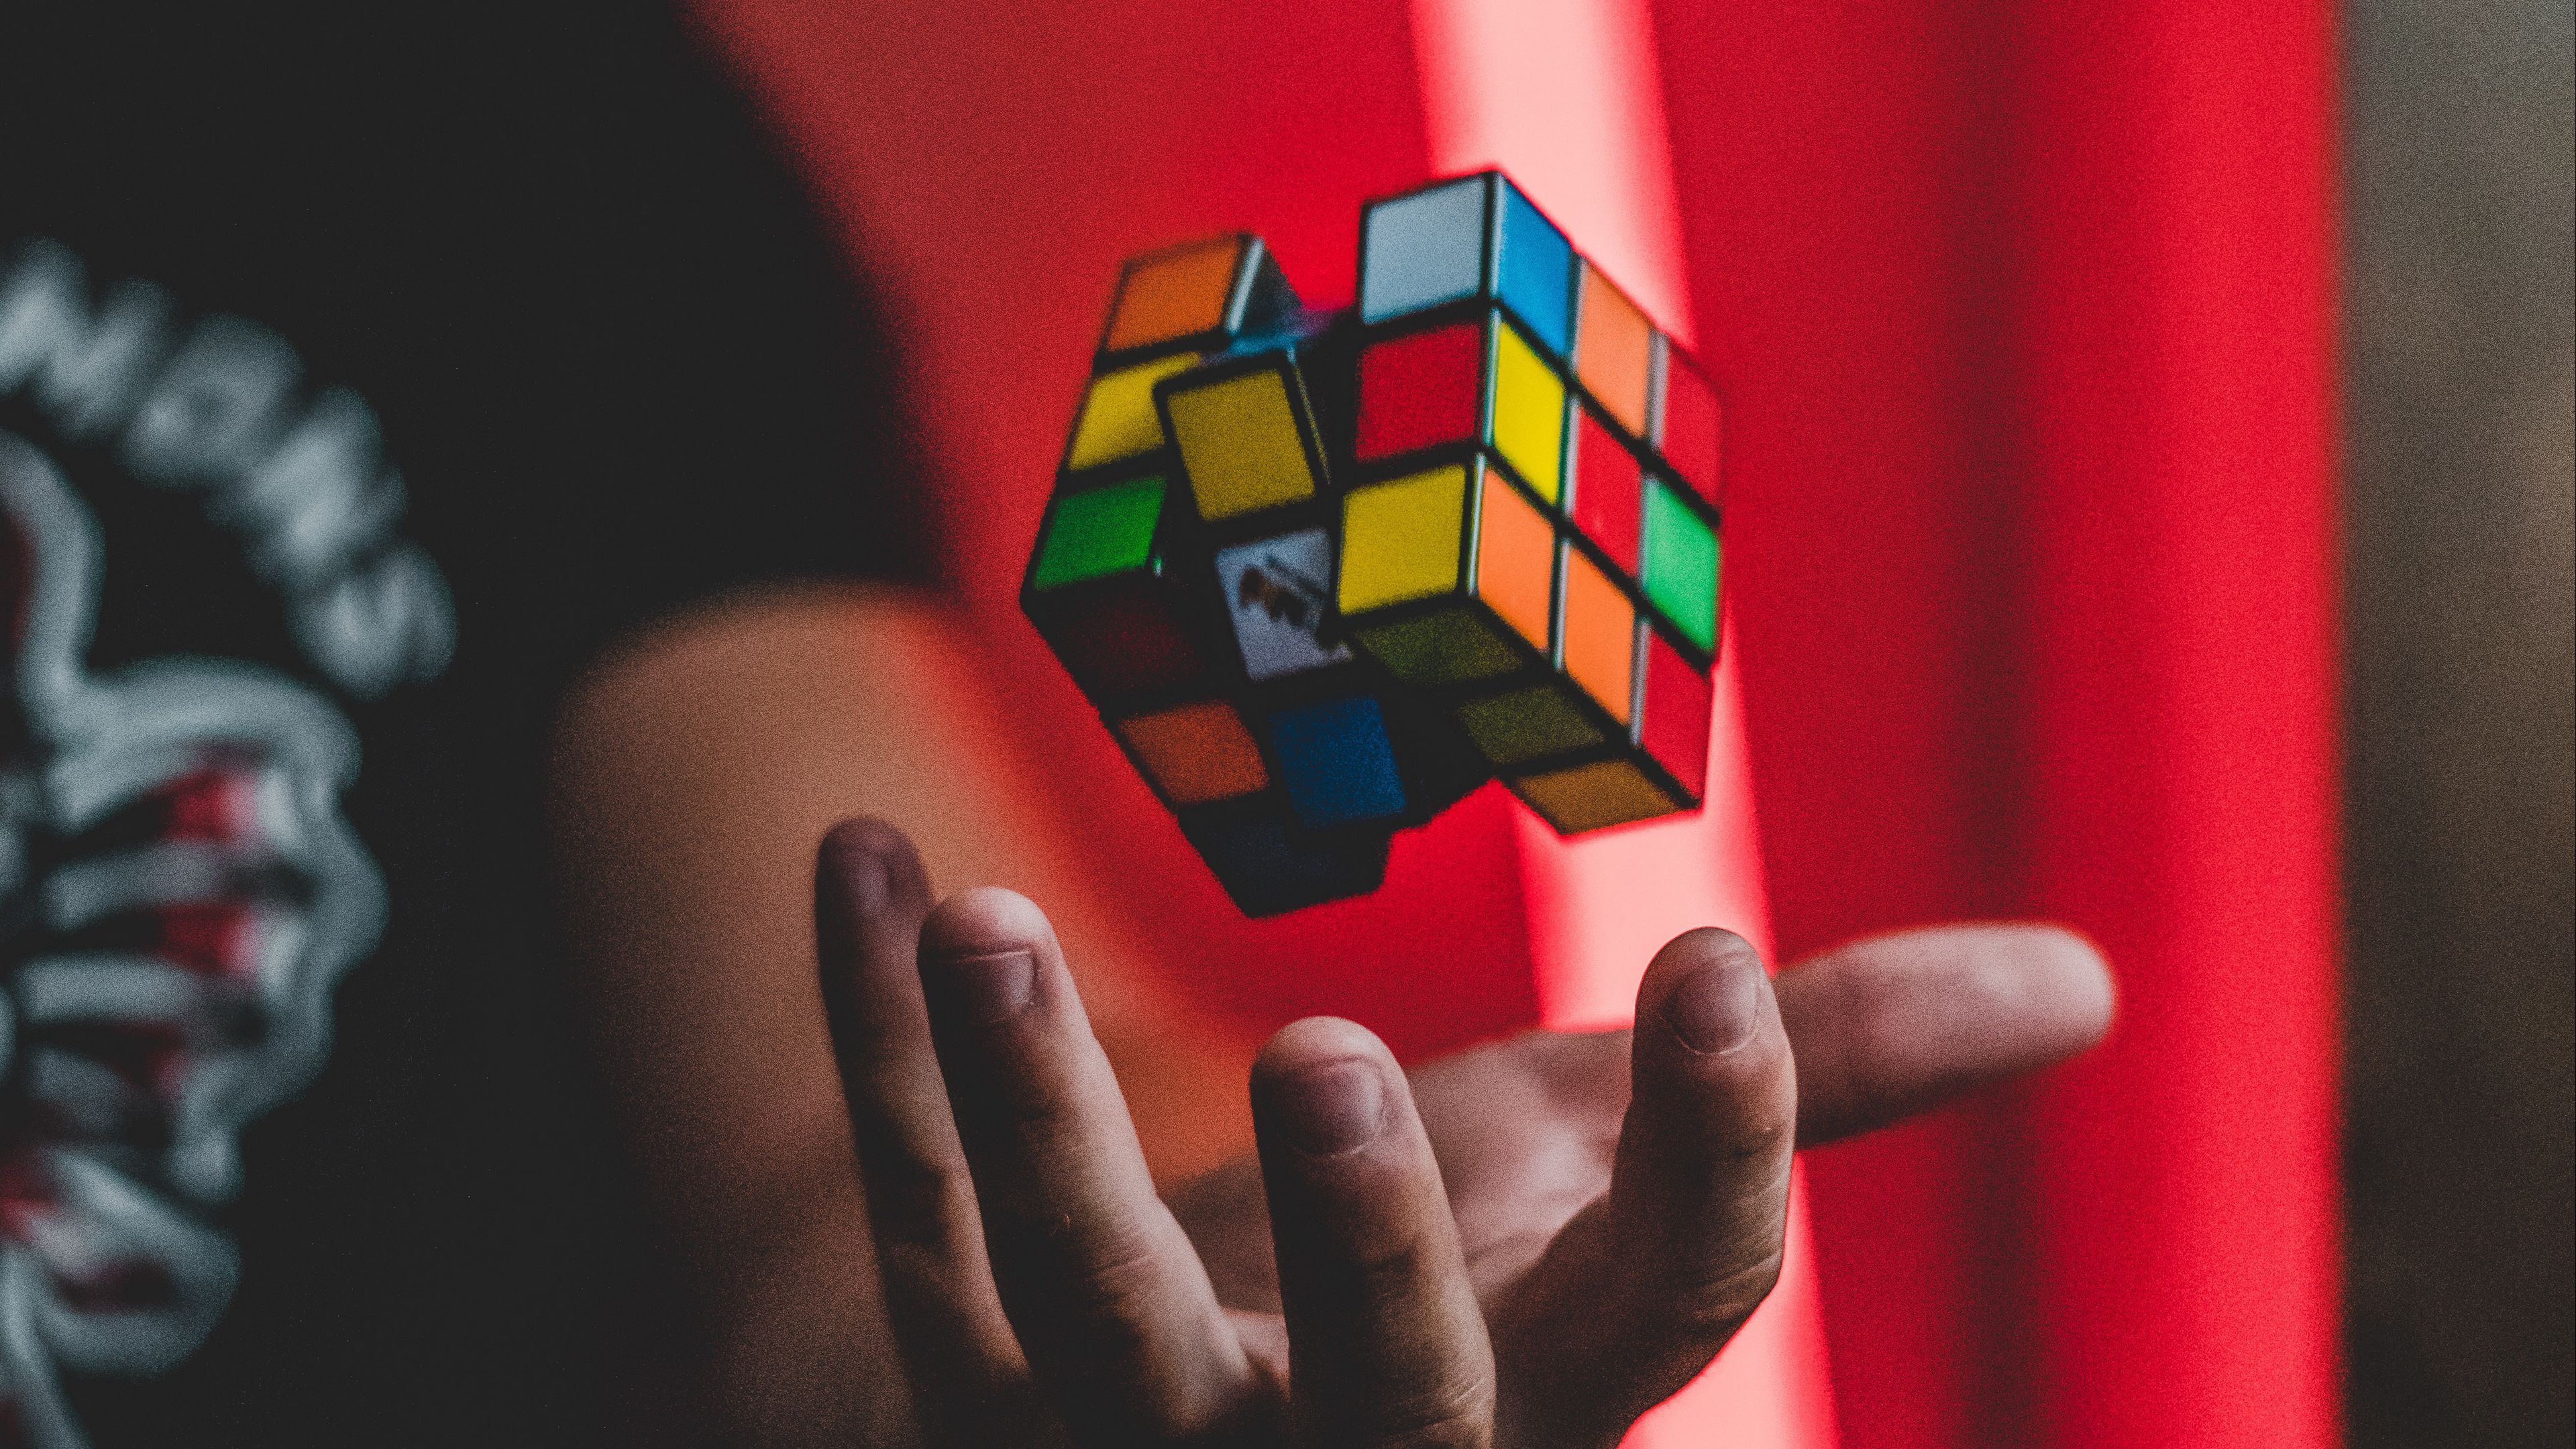 Download wallpaper 3840x2160 rubiks cube, hand, levitation, colorful 4k uhd 16:9 HD background